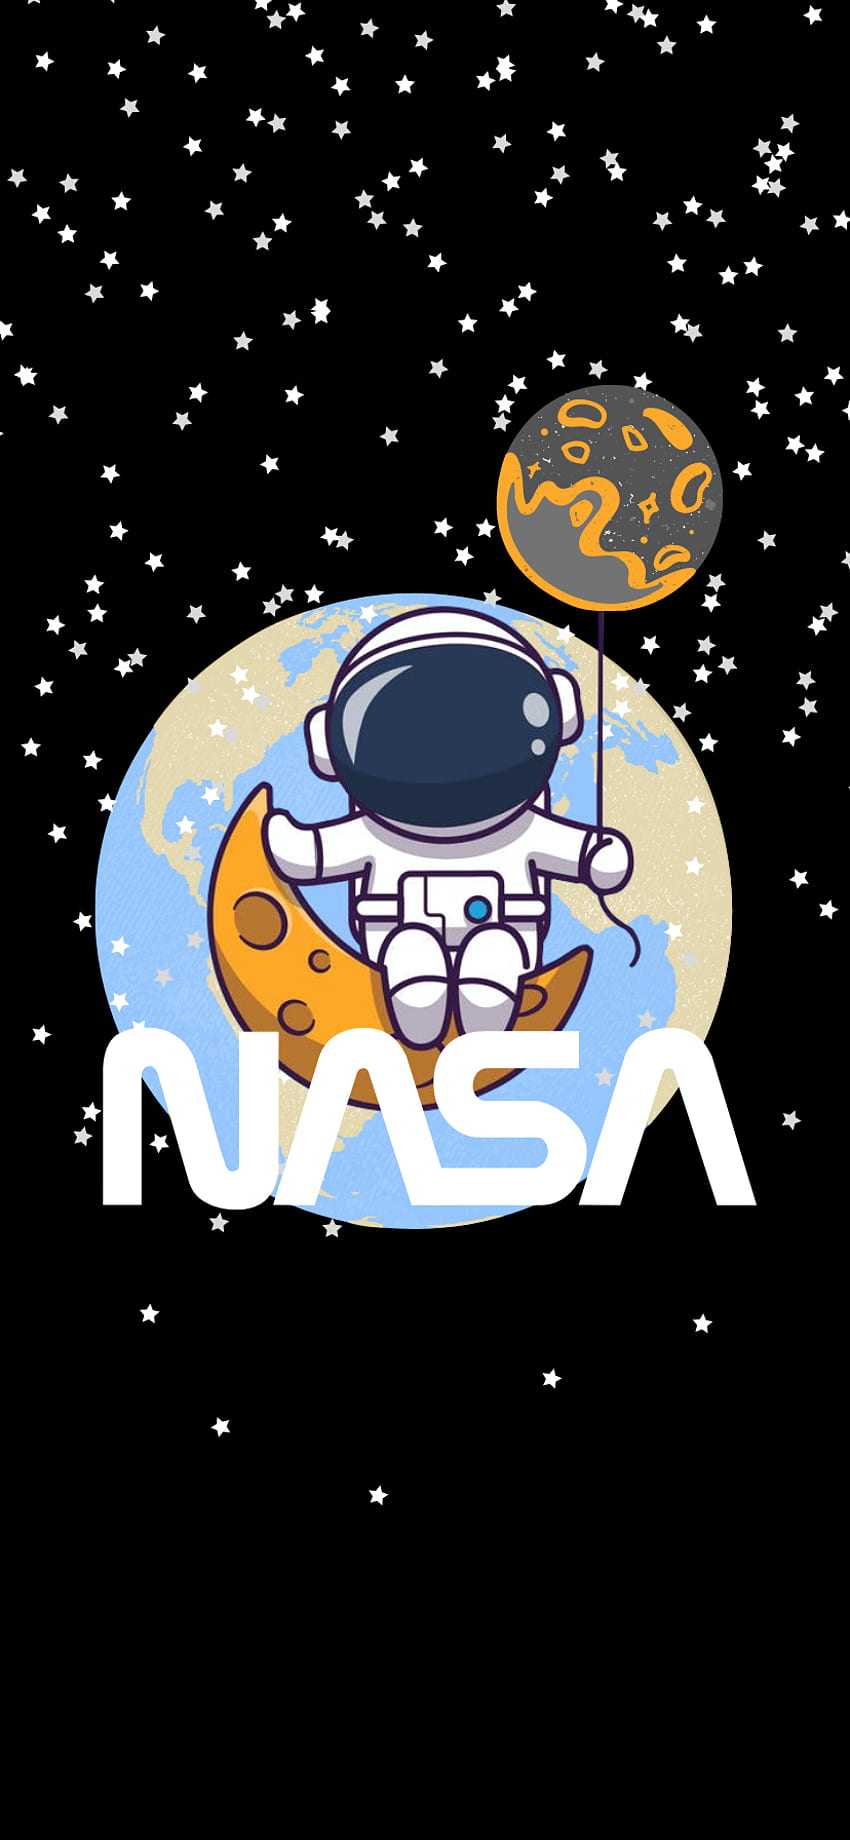 NASA Wallpaper for iPhone 11, Pro Max, X, 8, 7, 6 - Free Download on  3Wallpapers